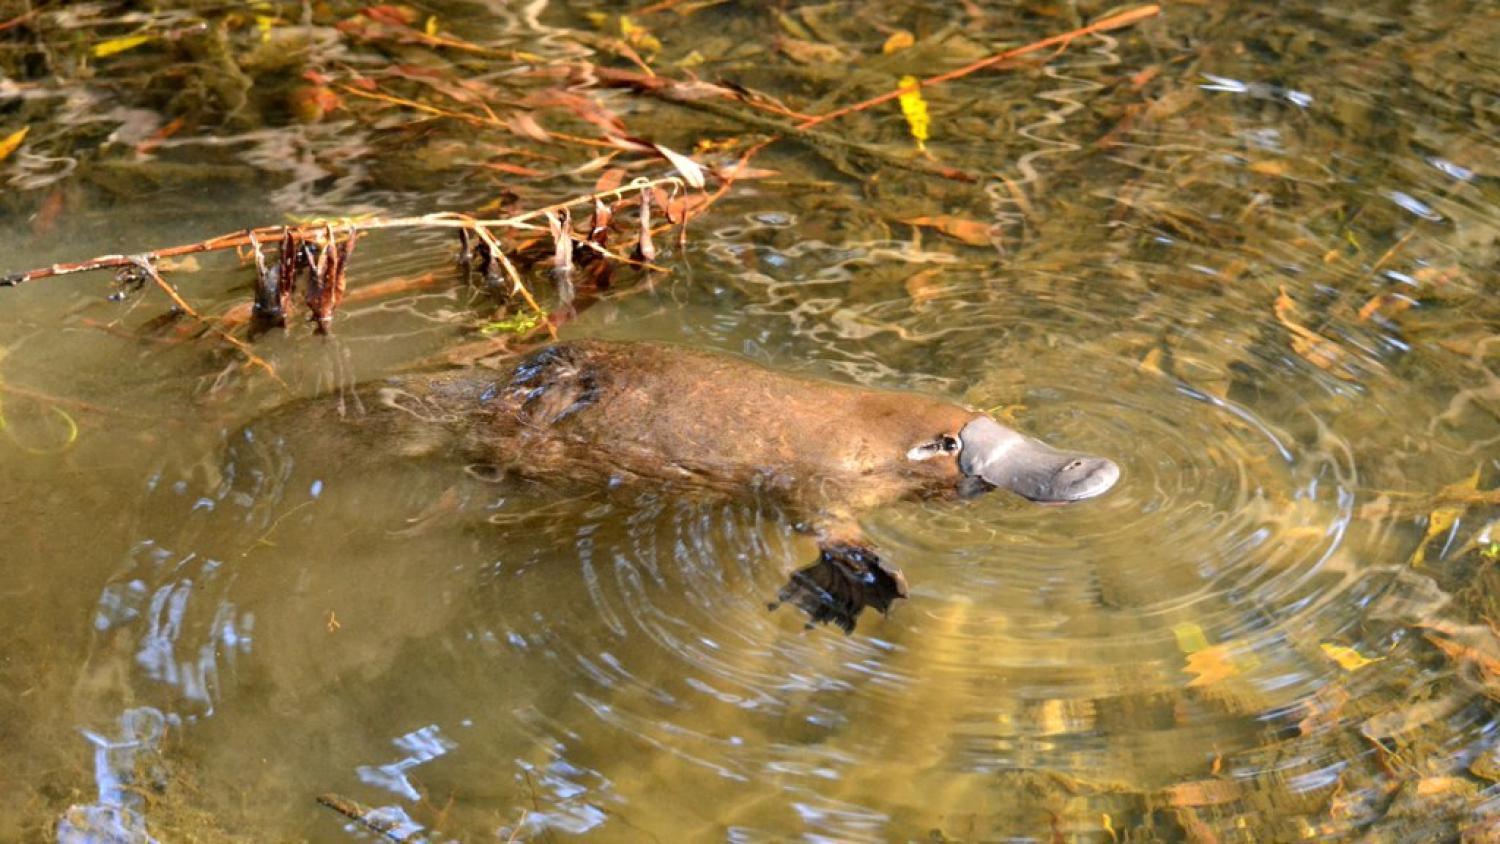 Seen any grubs? This platypus is on the hunt (Photo: Klaus/Flickr)